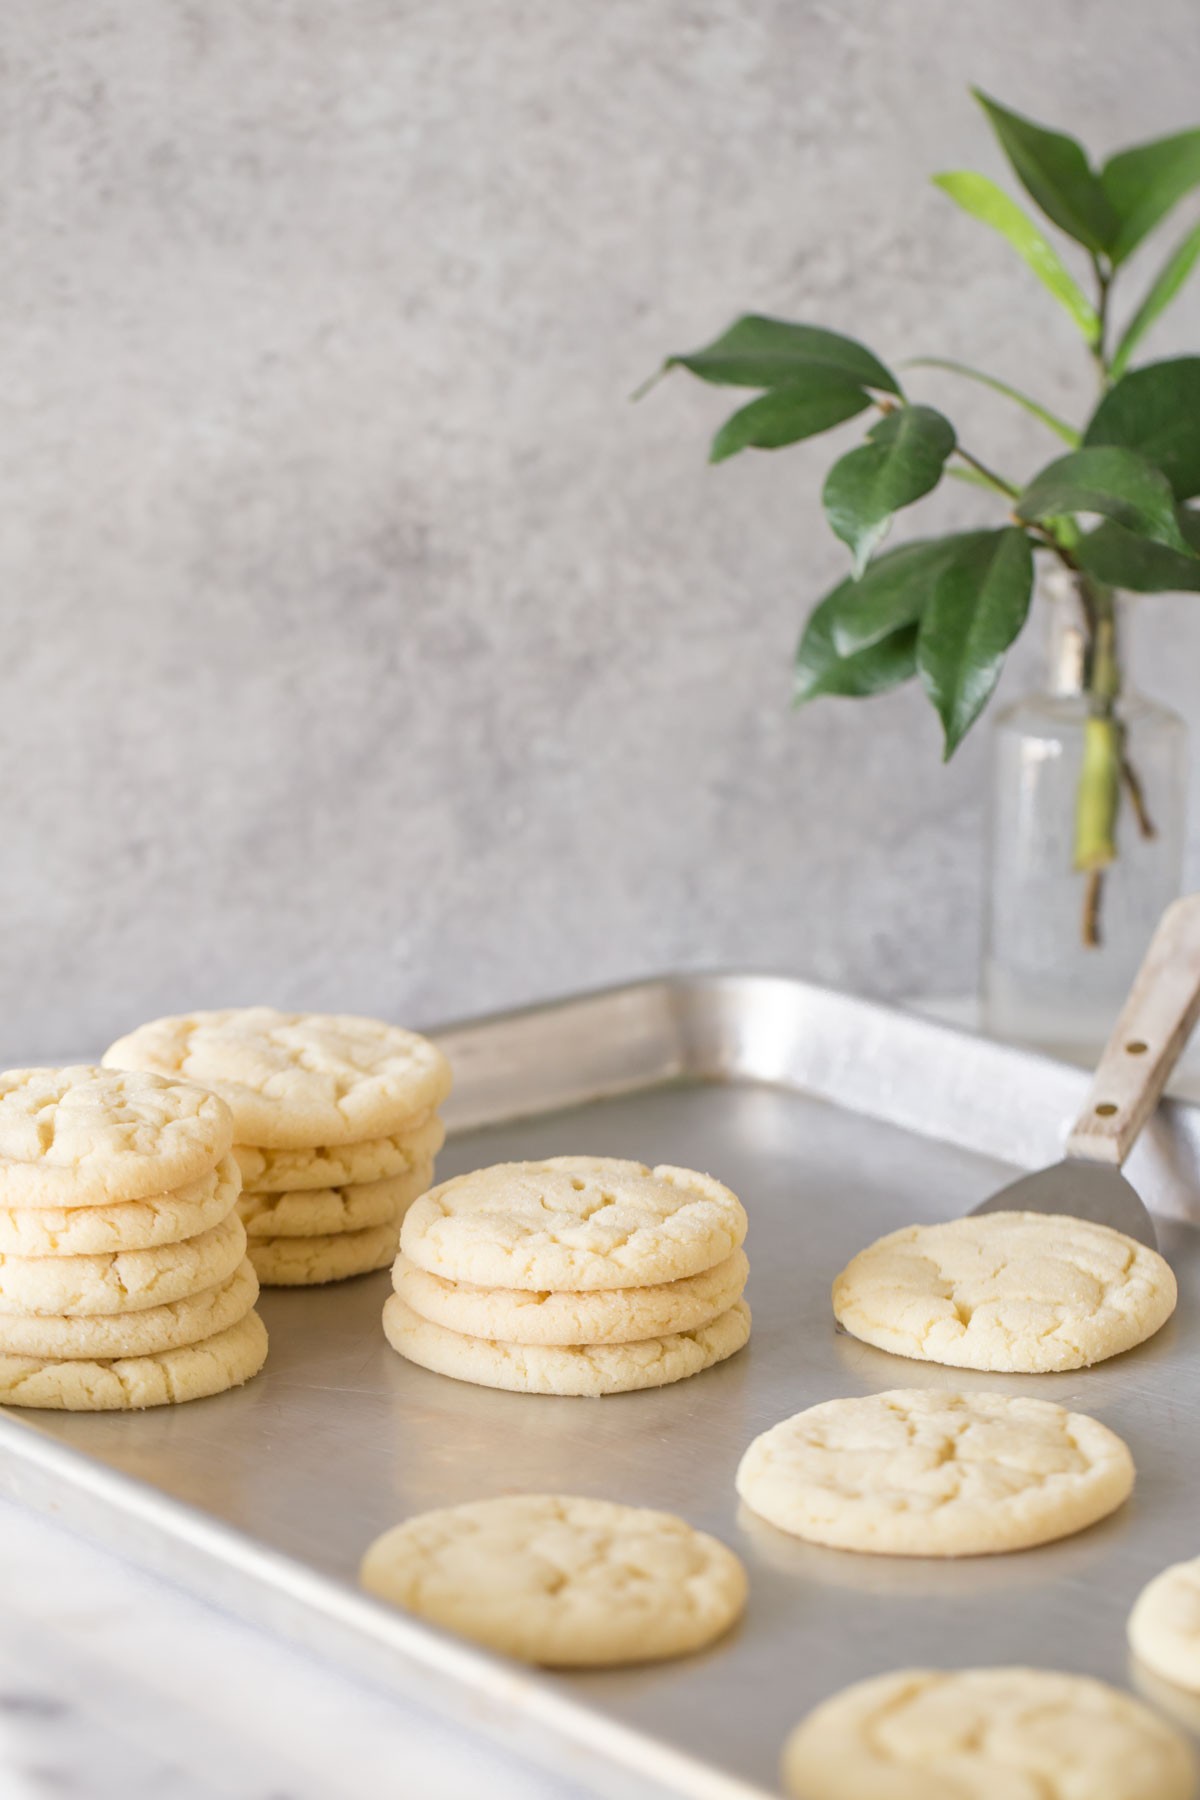 https://d2t88cihvgacbj.cloudfront.net/manage/wp-content/uploads/2019/08/Soft-and-Chewy-Sugar-Cookies-5.jpg?x24658